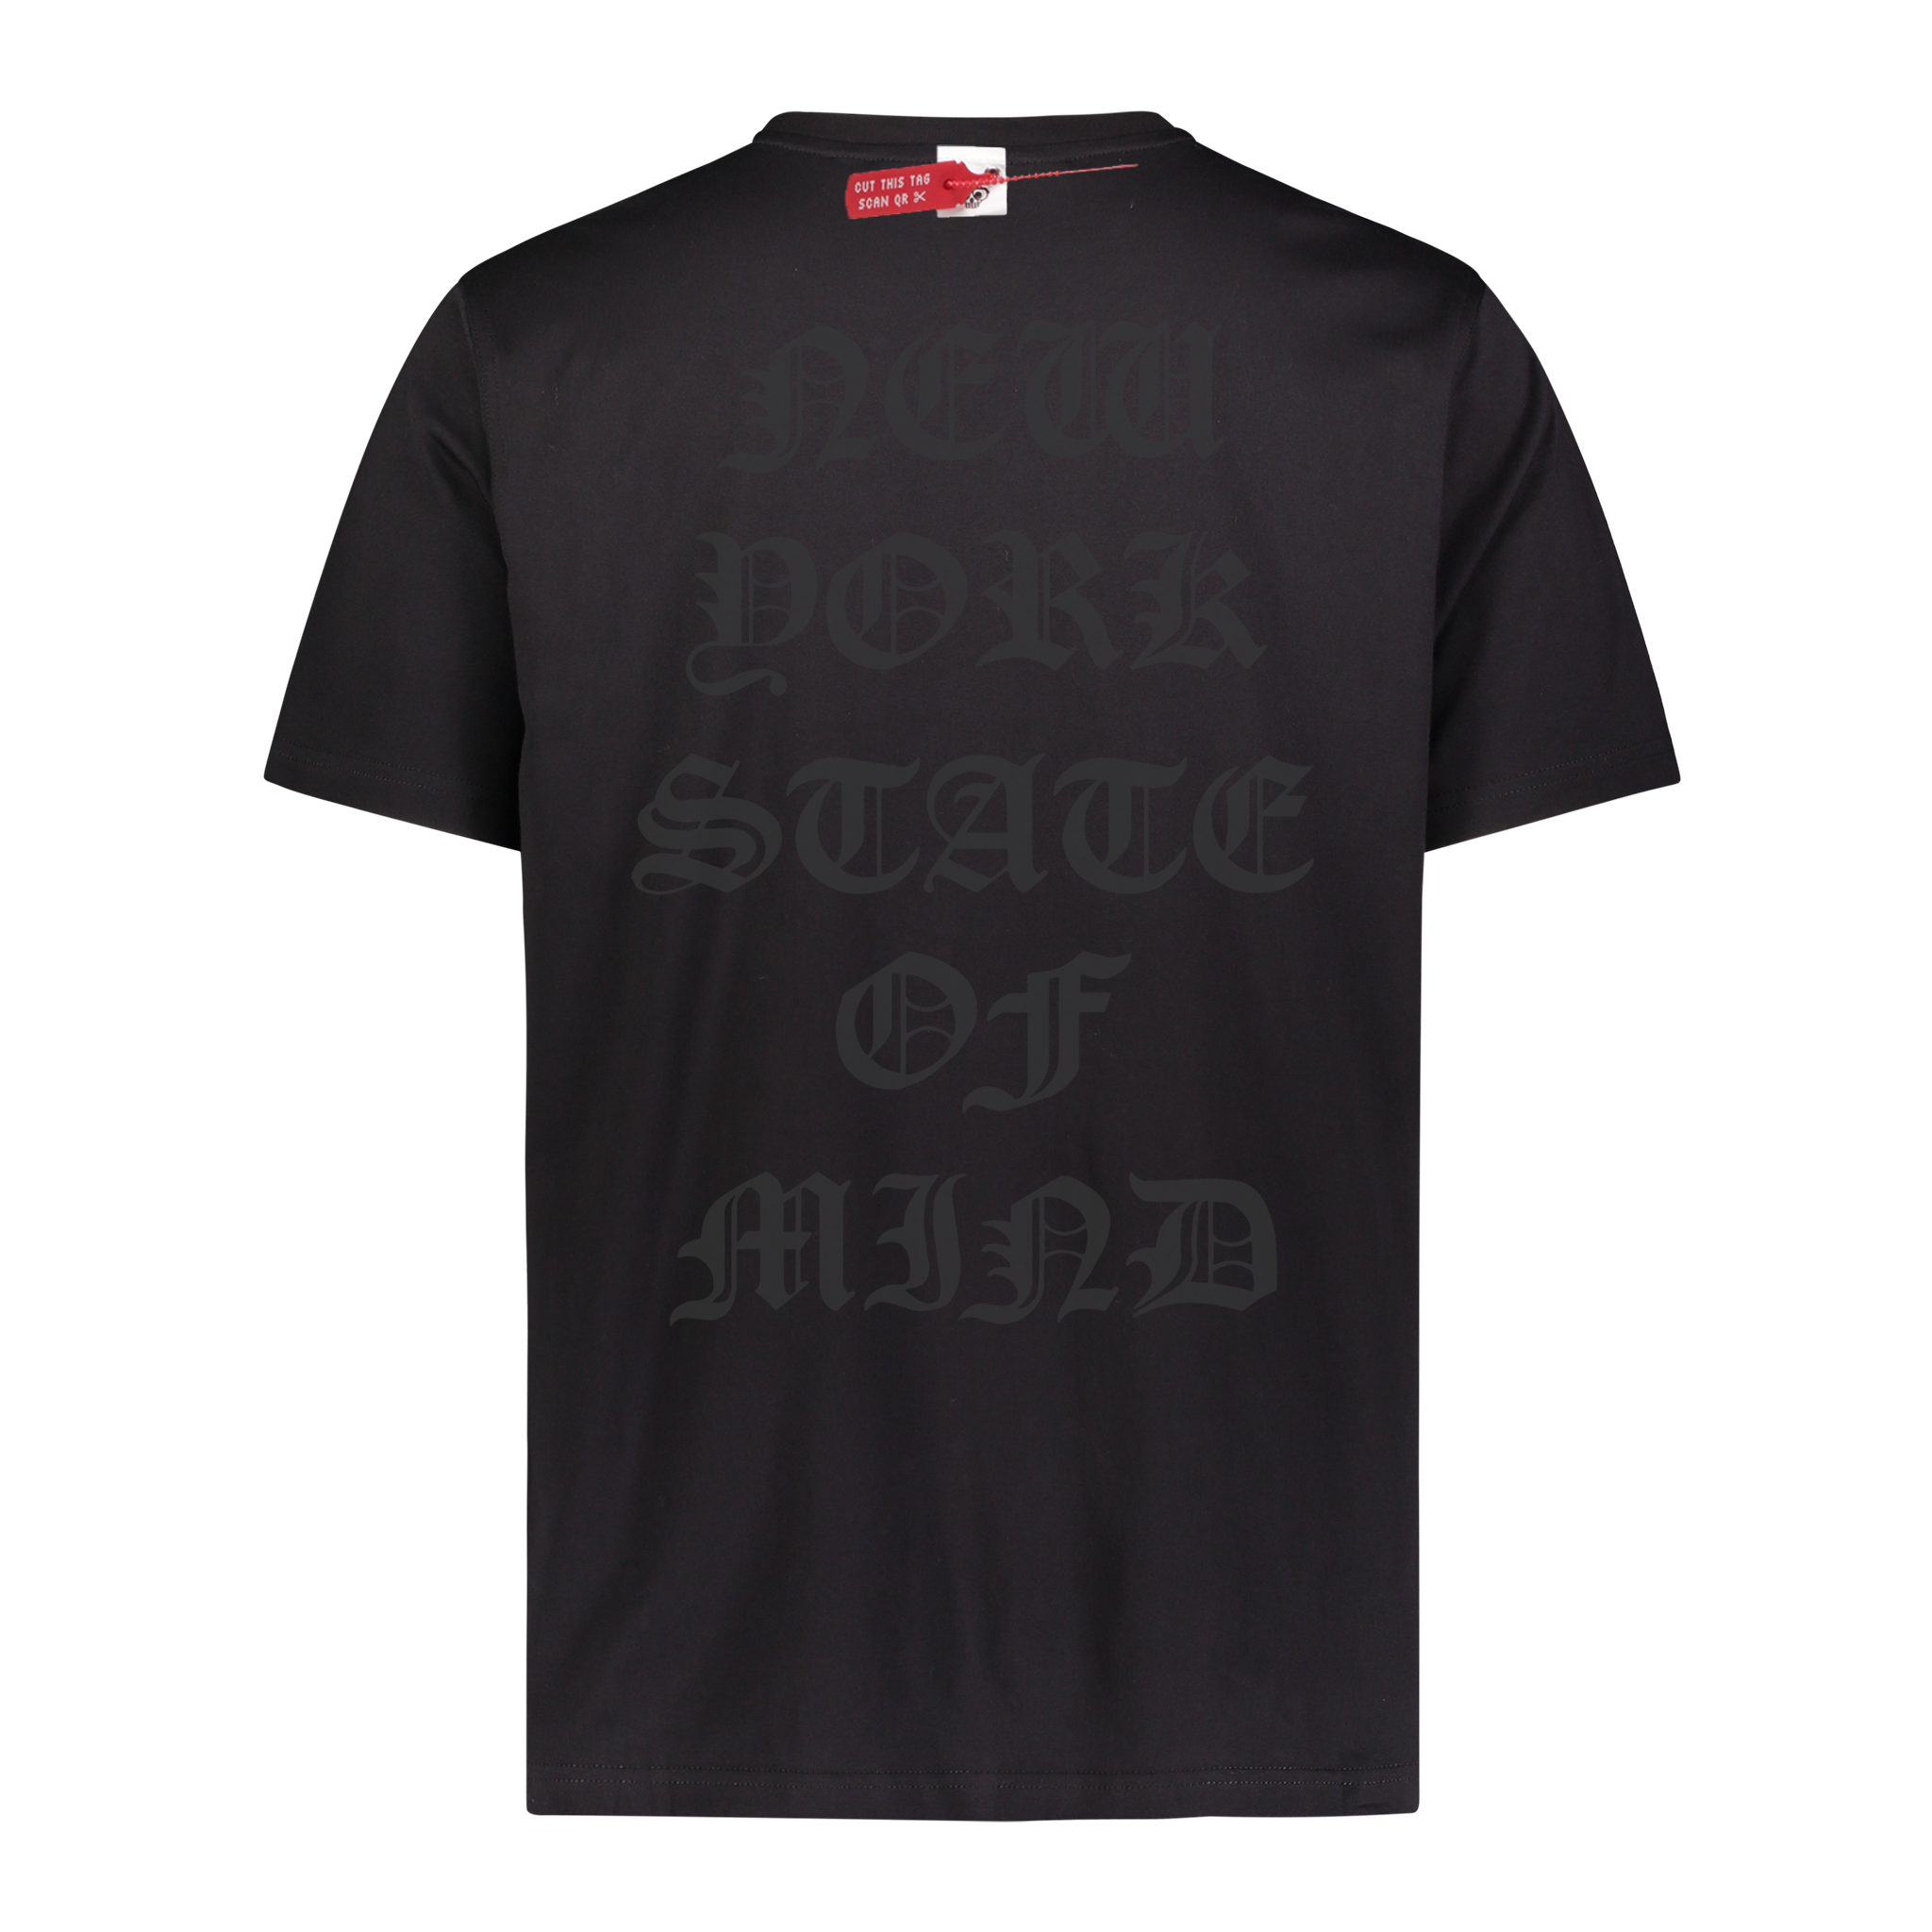 NY STATE OF MIND TEE